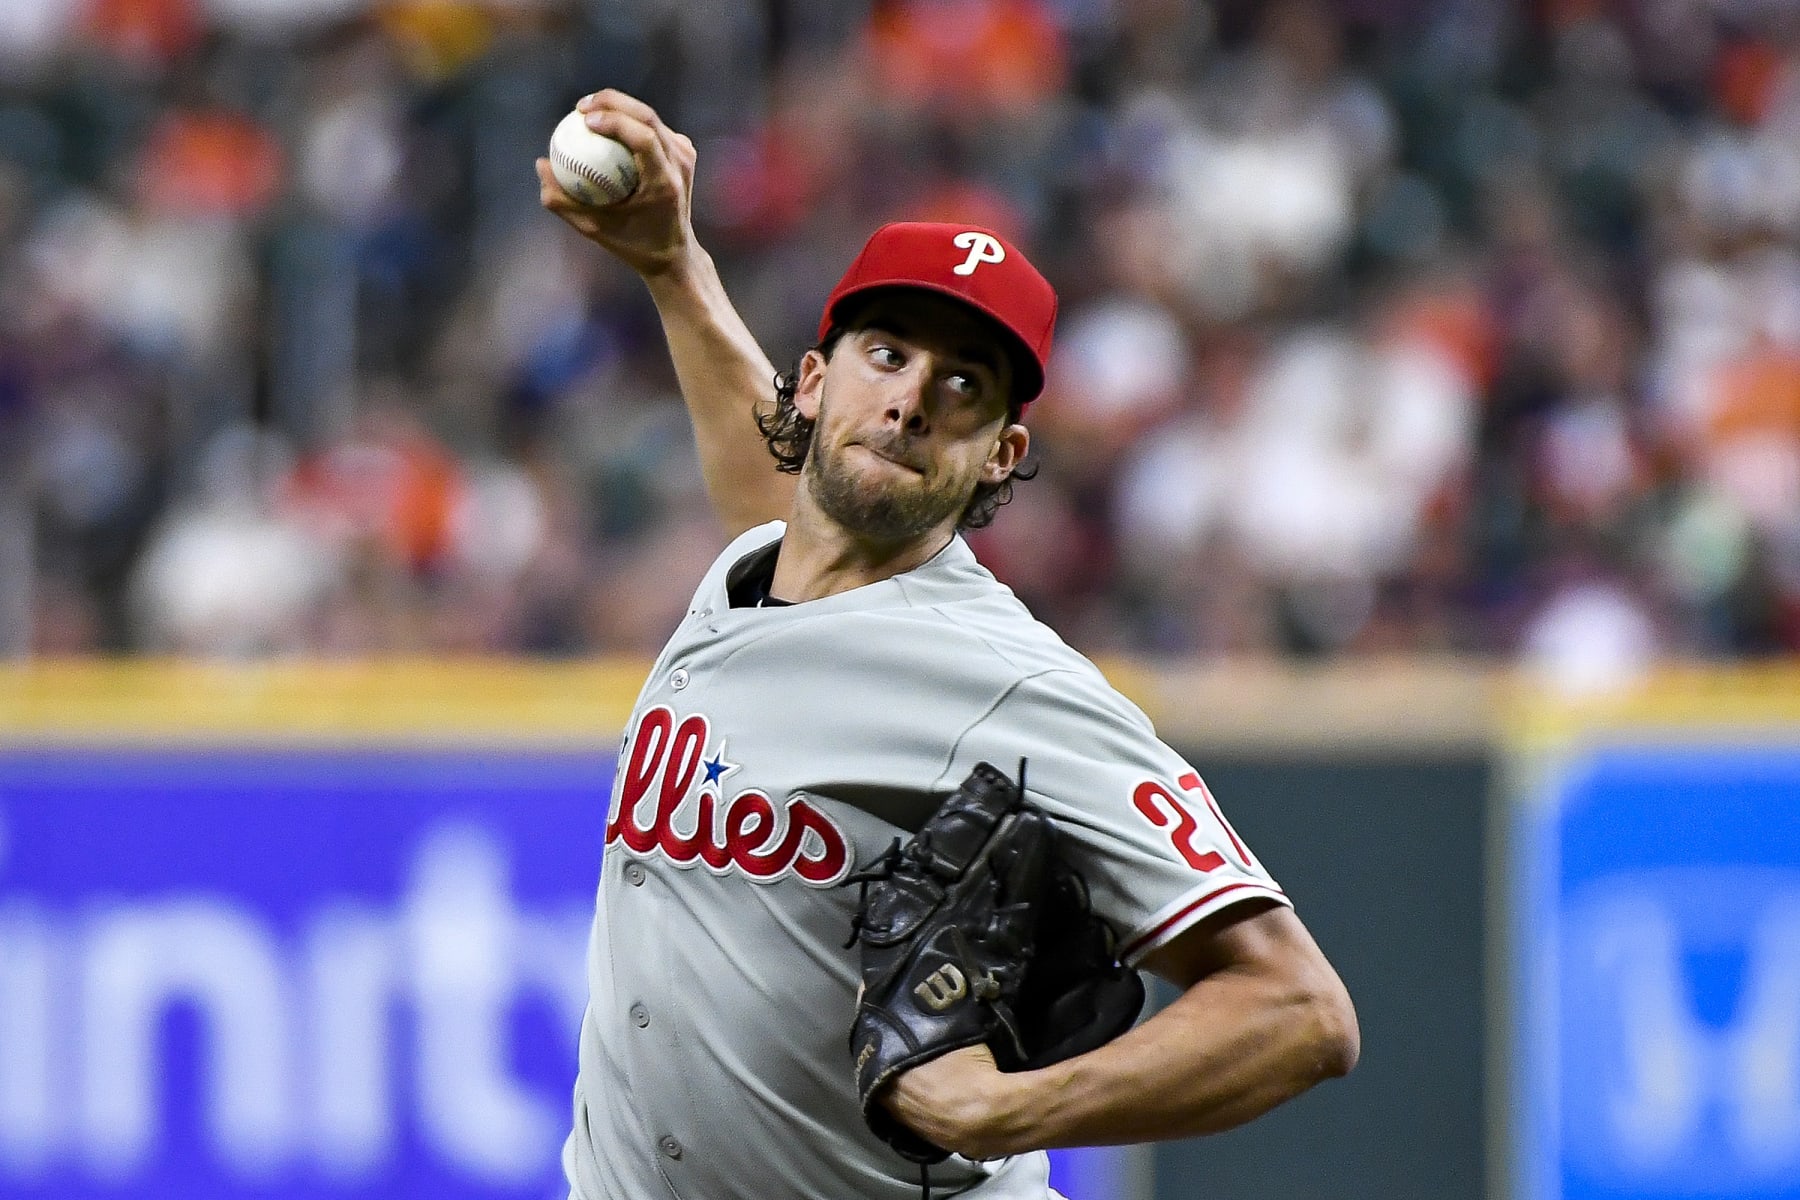 Arson Judge, Verlander-Scherzer Reunion and Other 2022 MLB Winter Meetings  Takeaways, News, Scores, Highlights, Stats, and Rumors